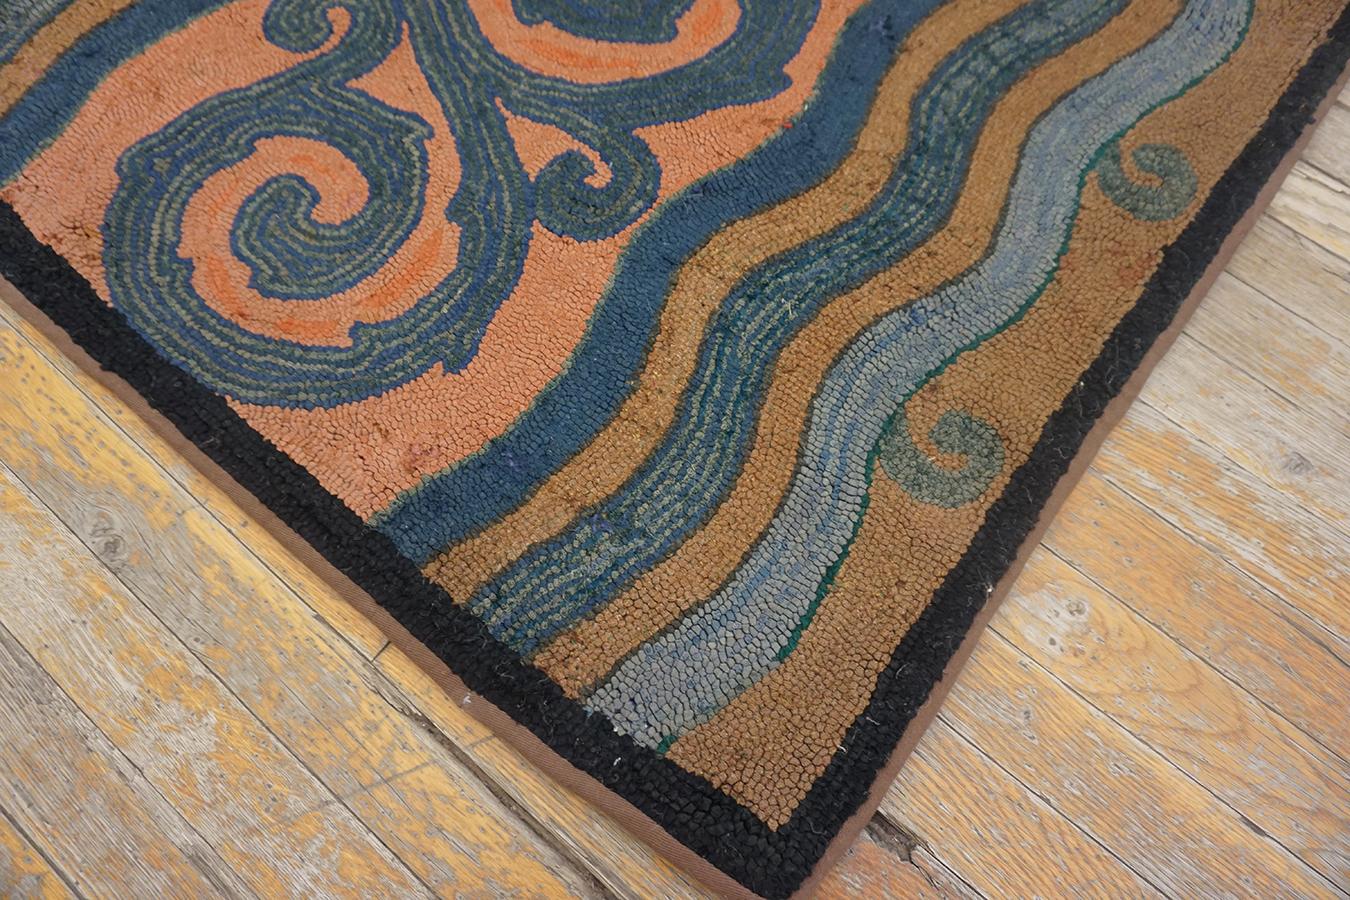 Early 20th Century American Hooked Rug ( 3' x 5'3